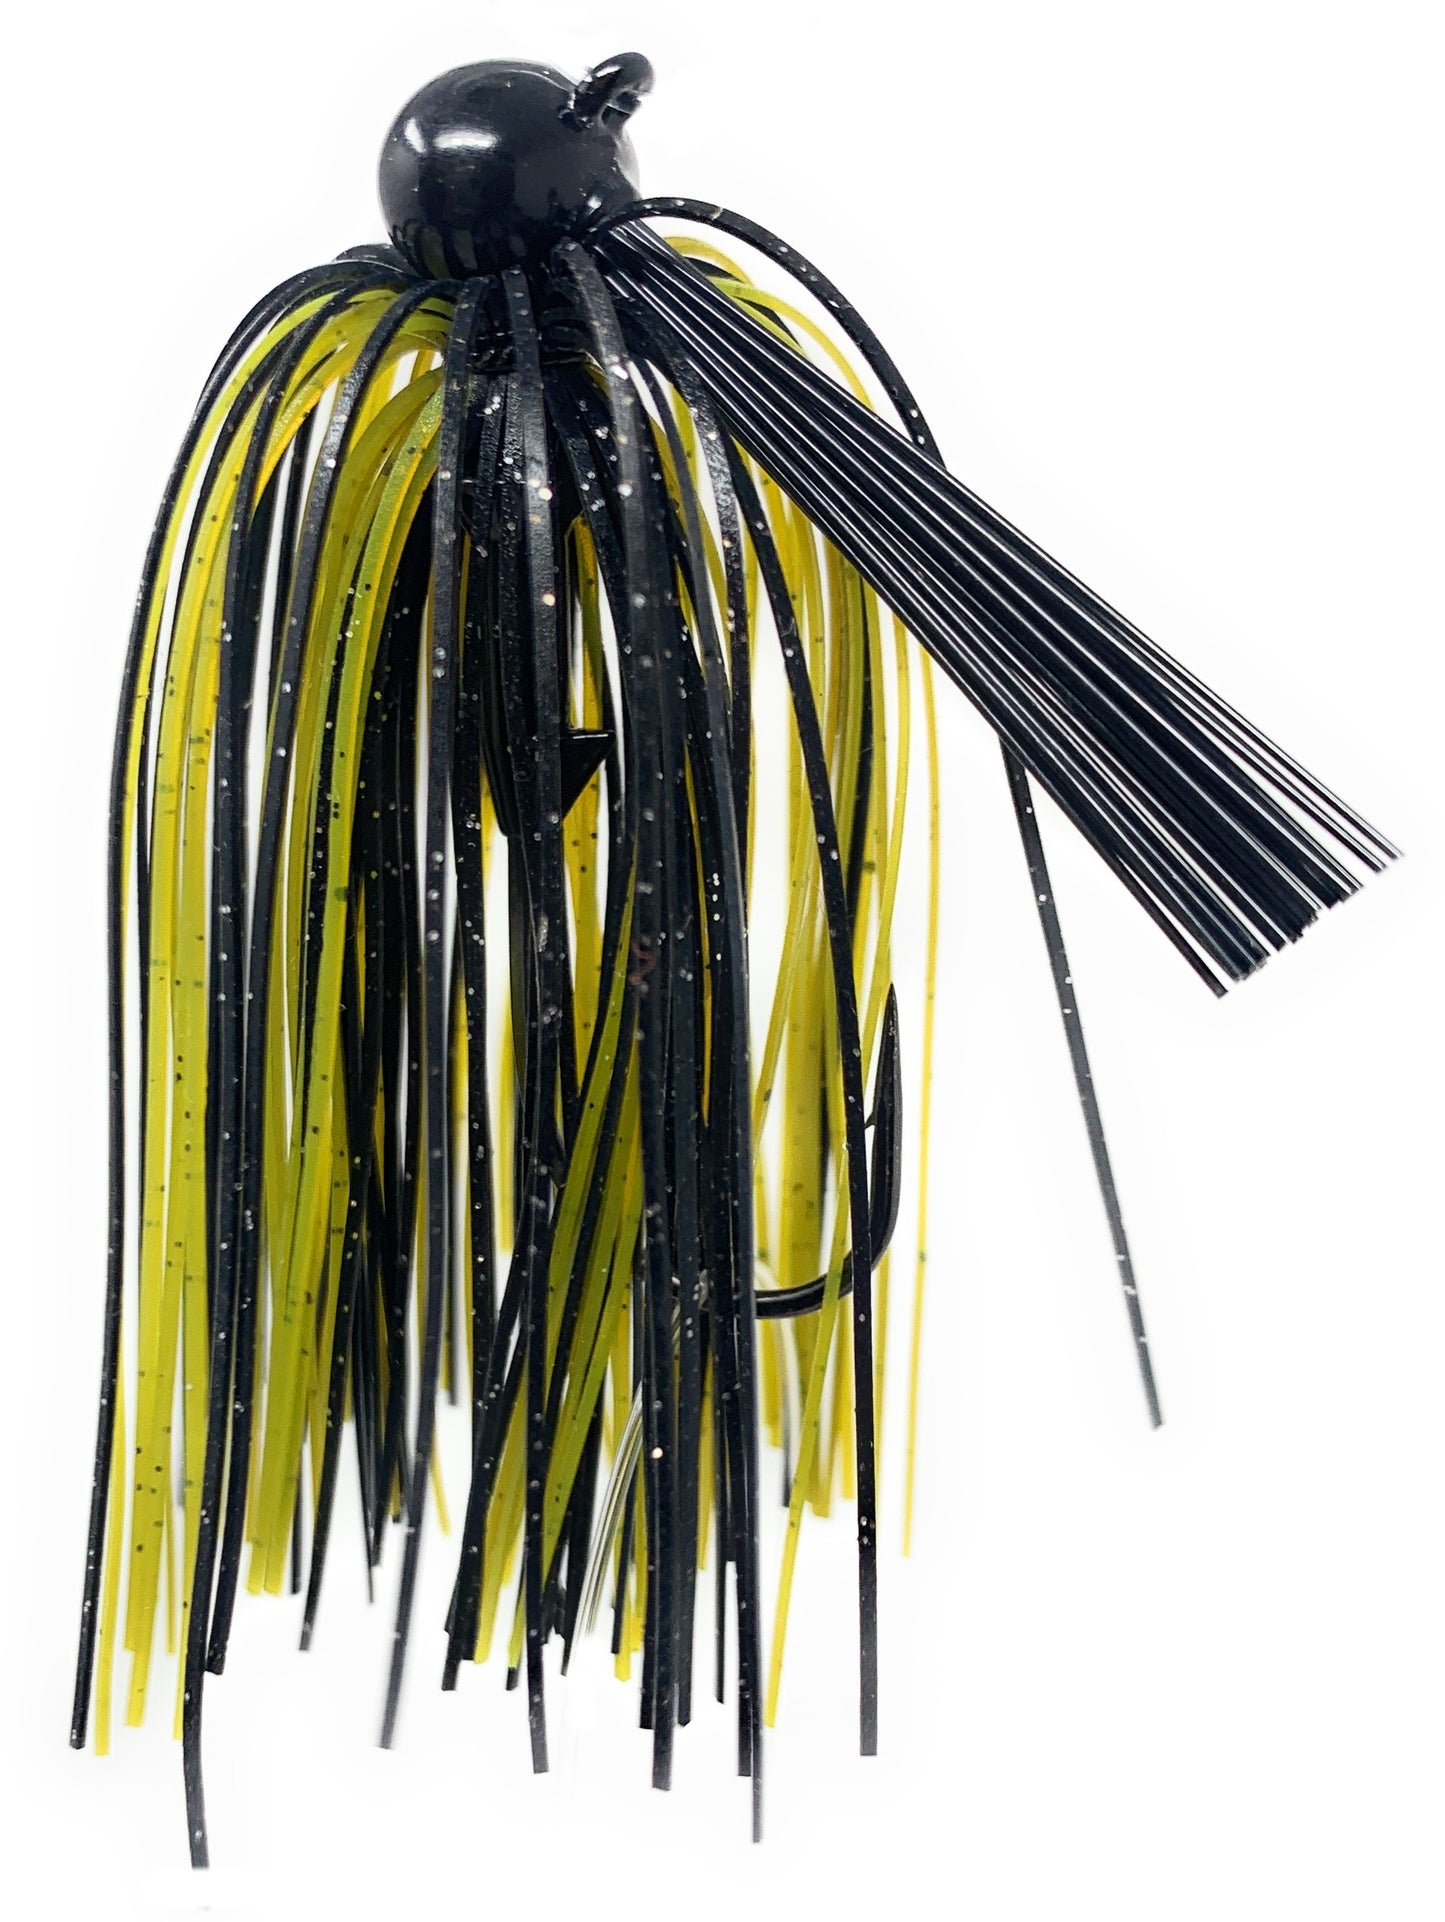 Reaction Tackle Tungsten Football Jigs (2-Pack)